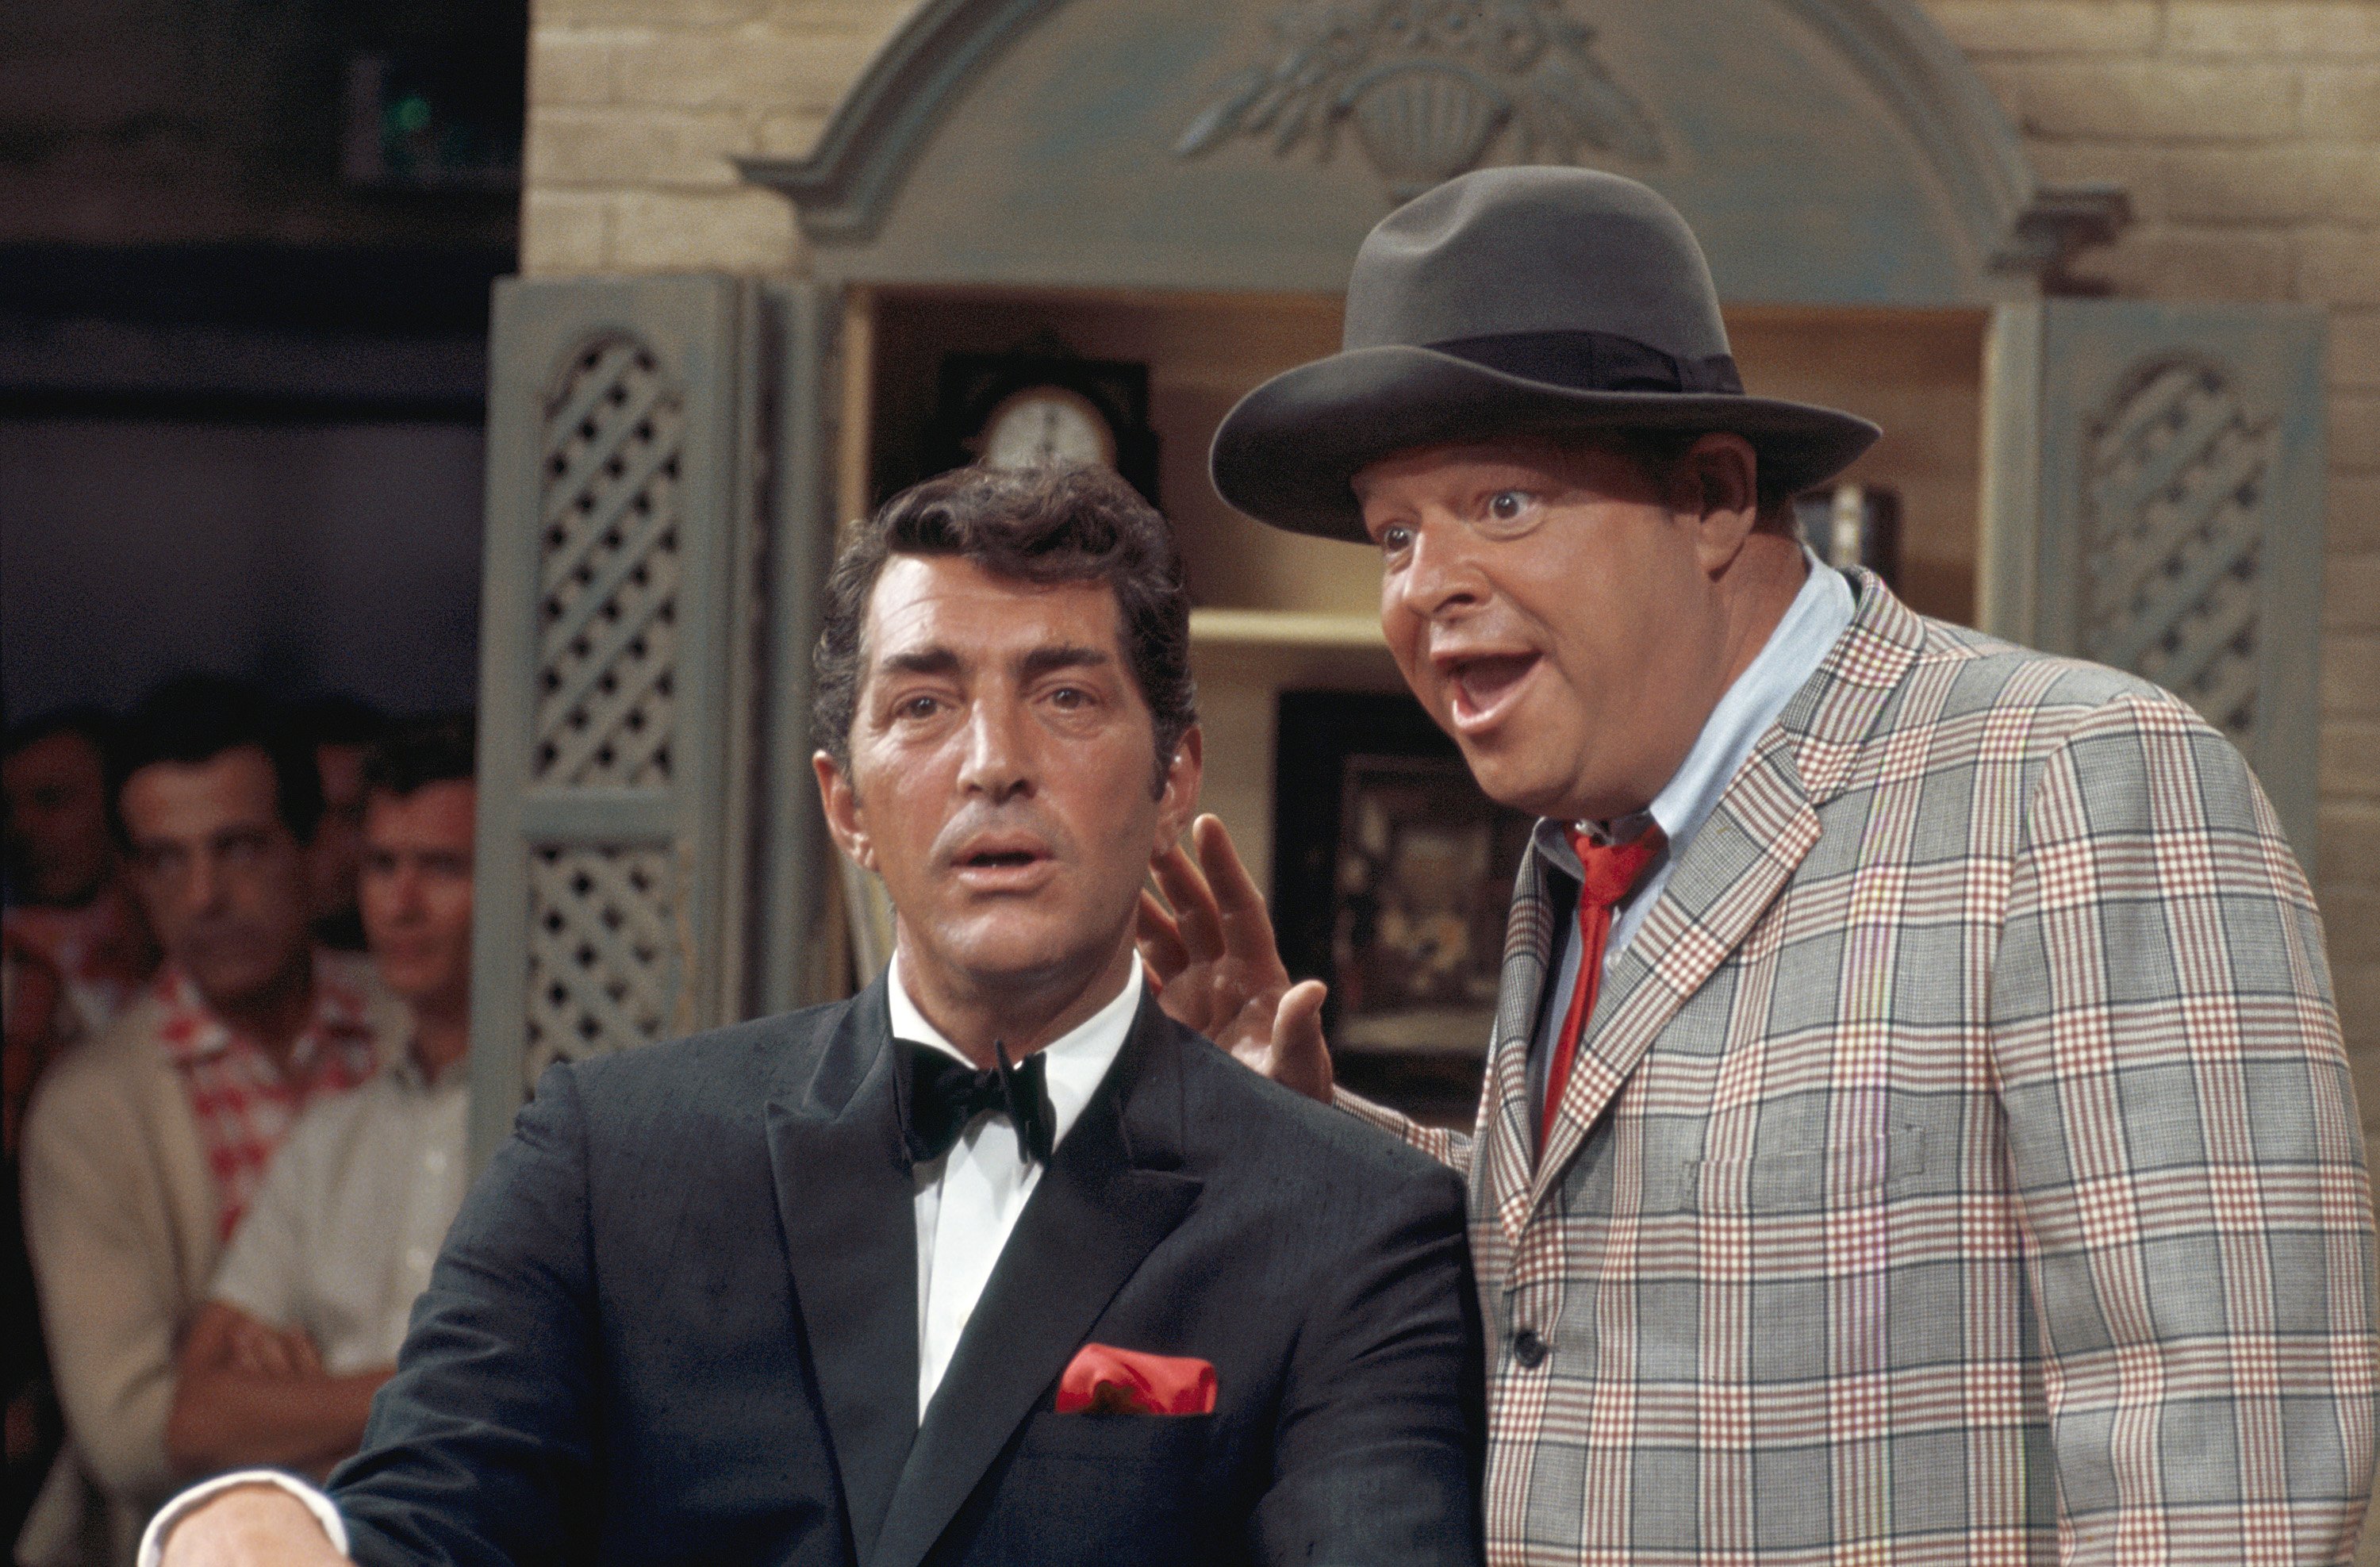 THE DEAN MARTIN SHOW: Host Dean Martin, Frank Fontaine as Crazy Guggenheim. | Source: Getty Images